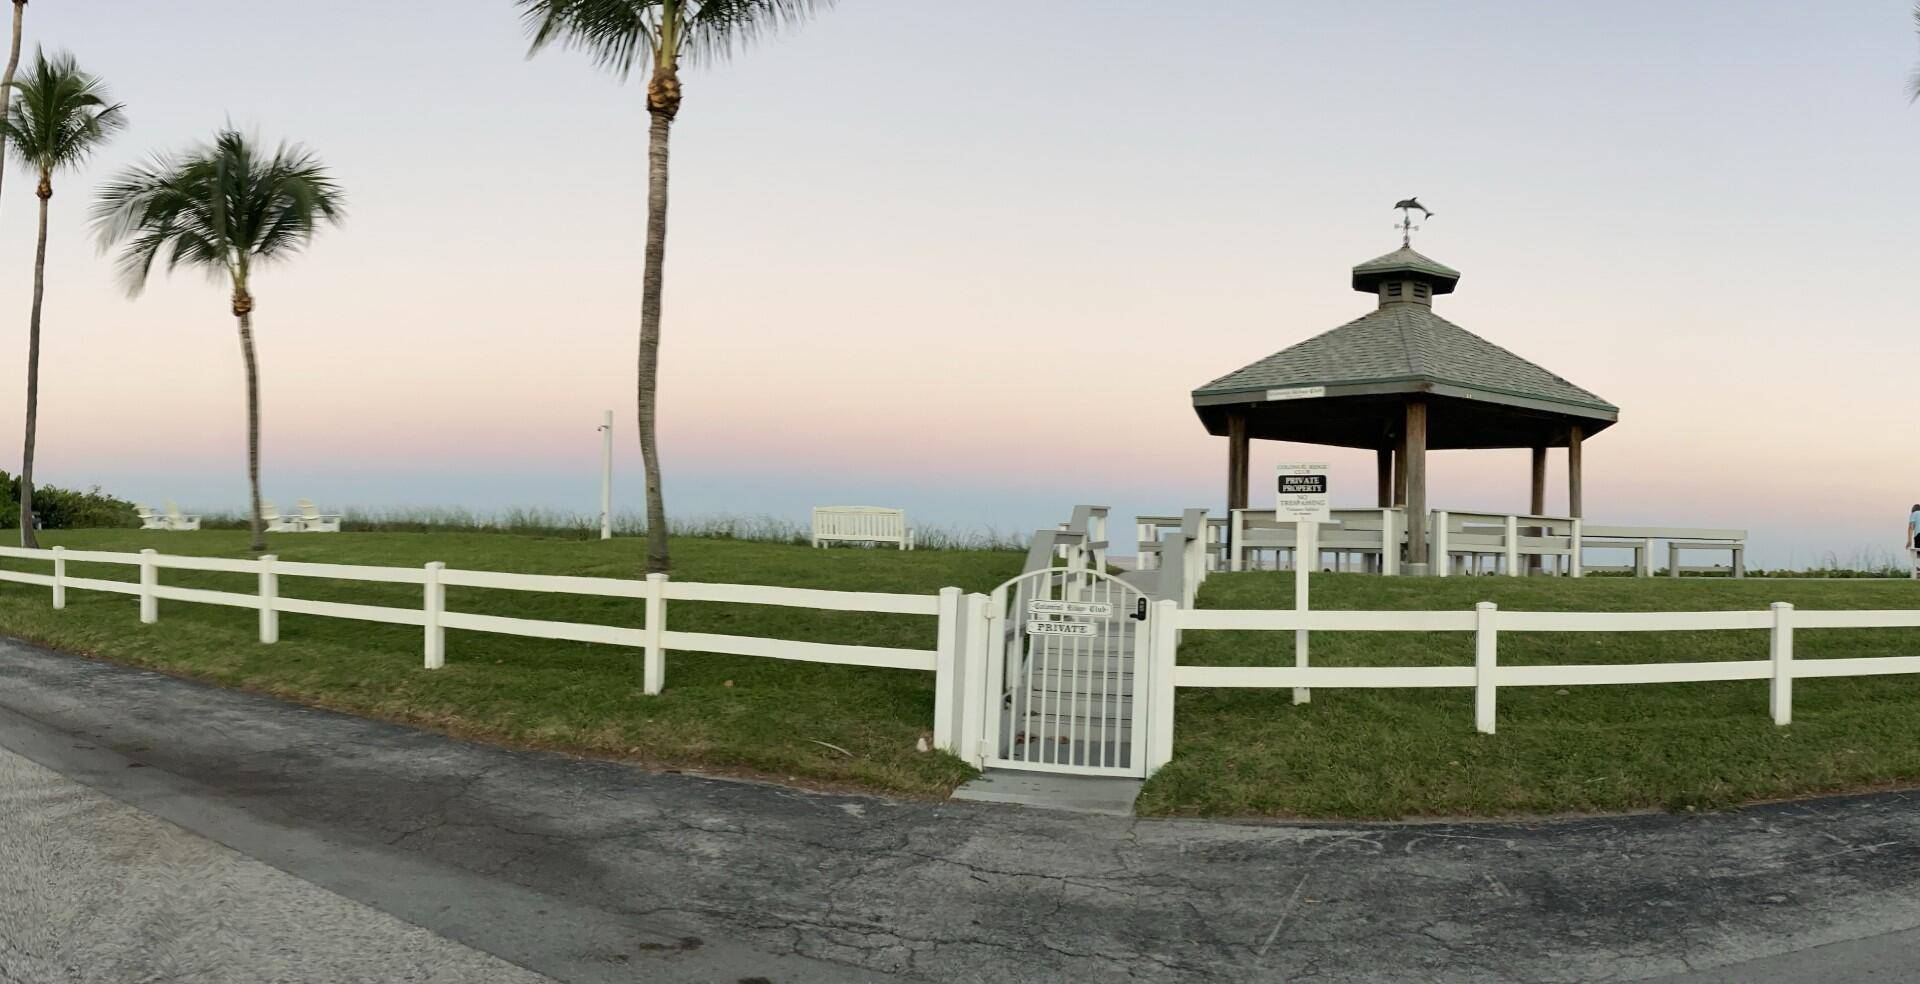 Live the beach lifestyle in this boutique community nestled between A1A and Old Ocean Blvd.